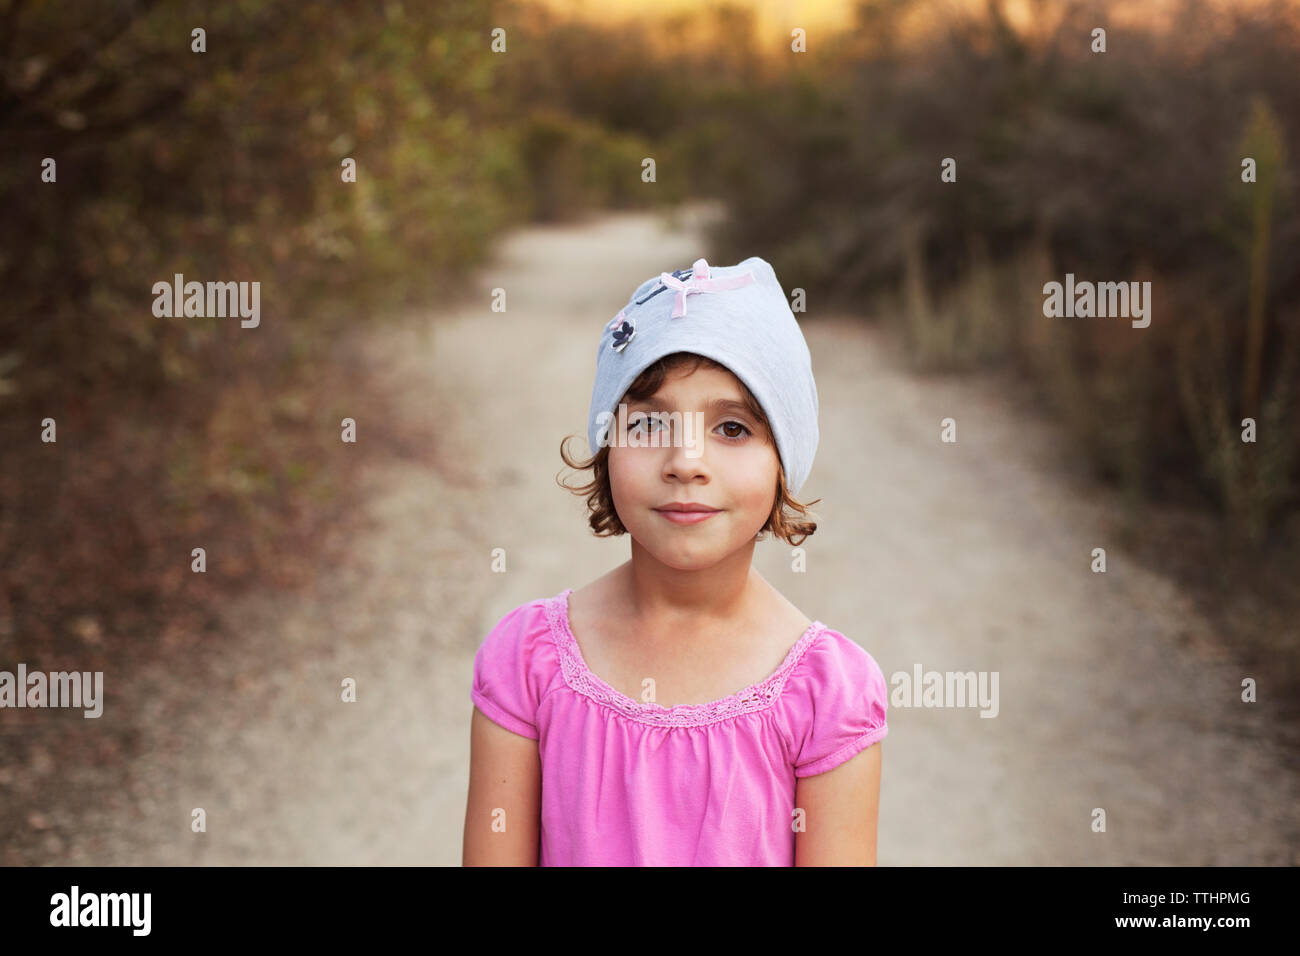 Portrait of girl wearing knit hat while standing on dirt road Stock Photo